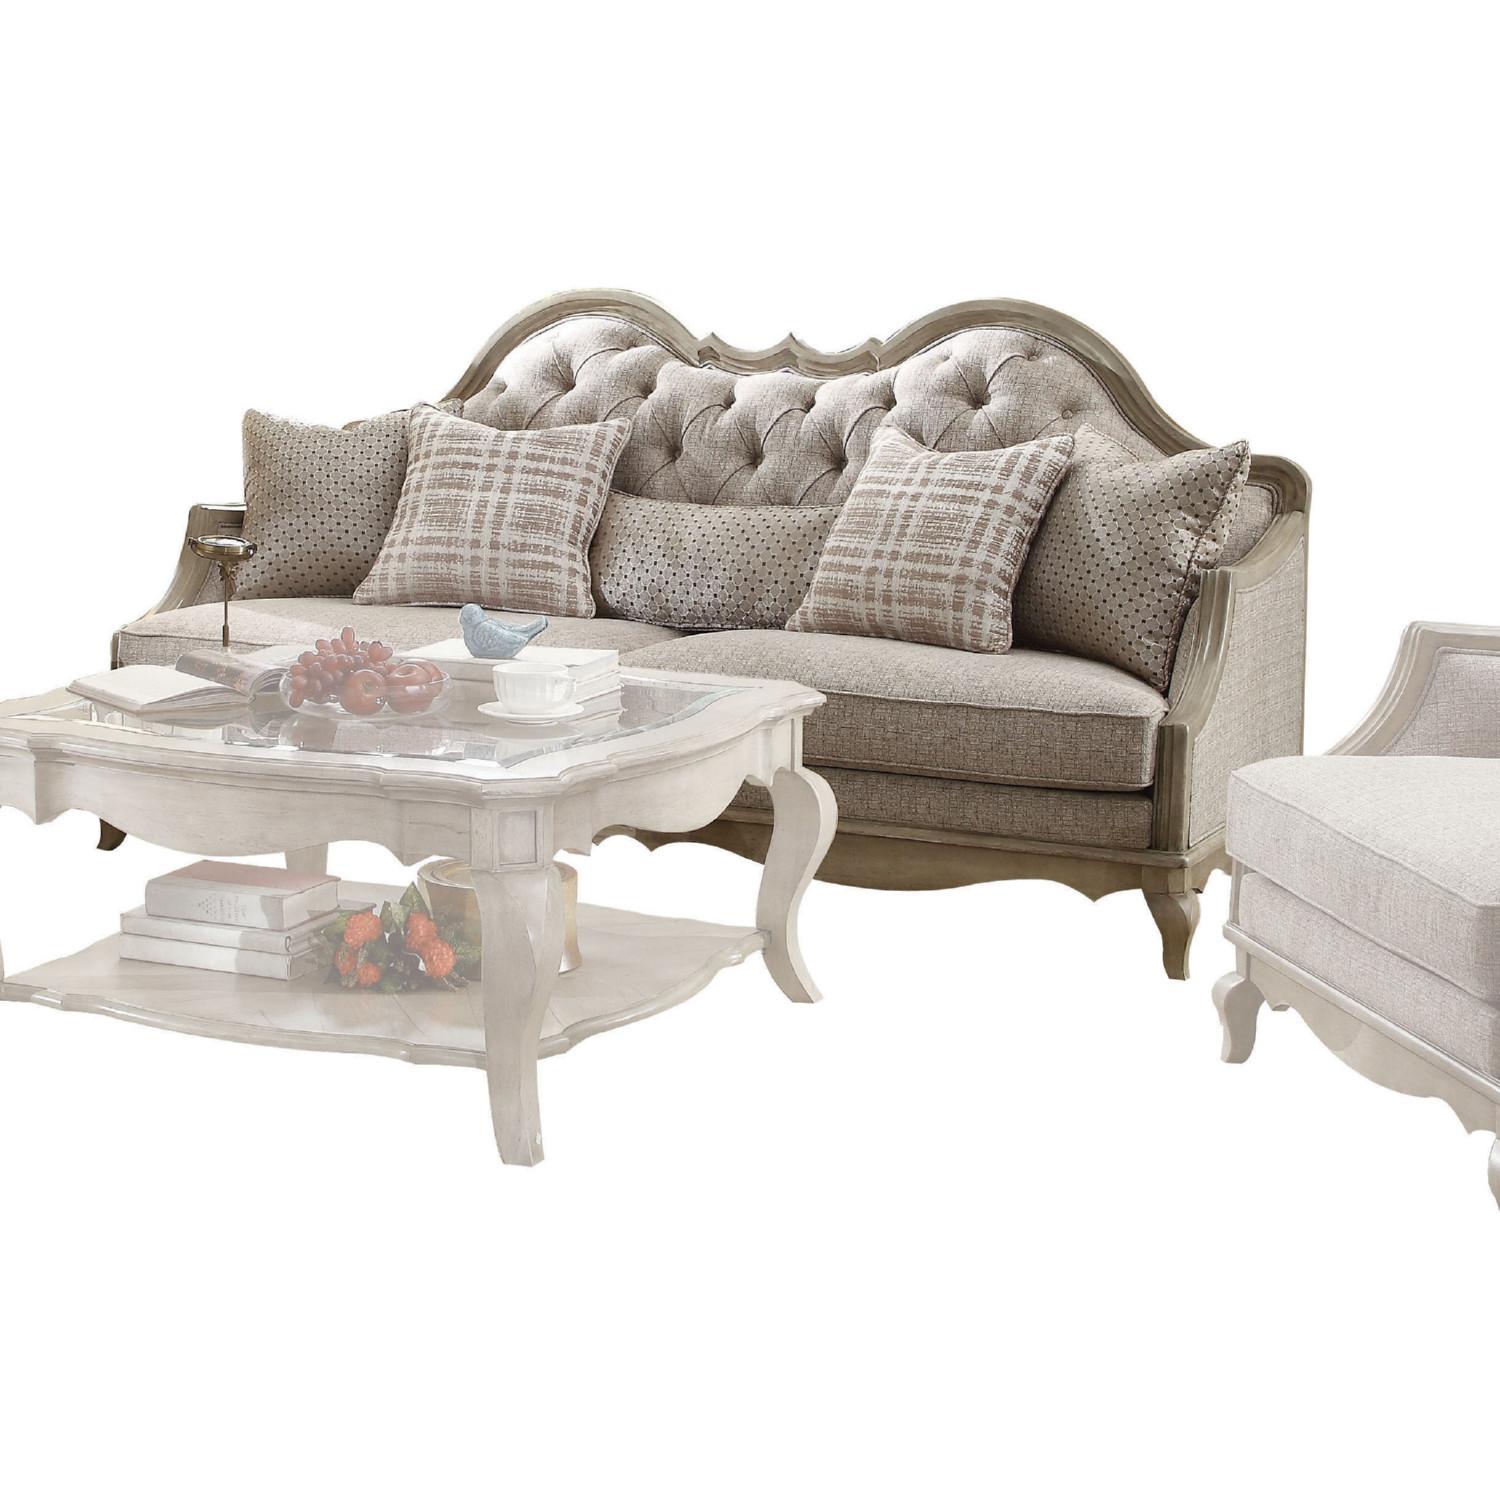 Classic, Traditional Sofa Chelmsford-56050 Chelmsford-56050 in Taupe, Beige Fabric